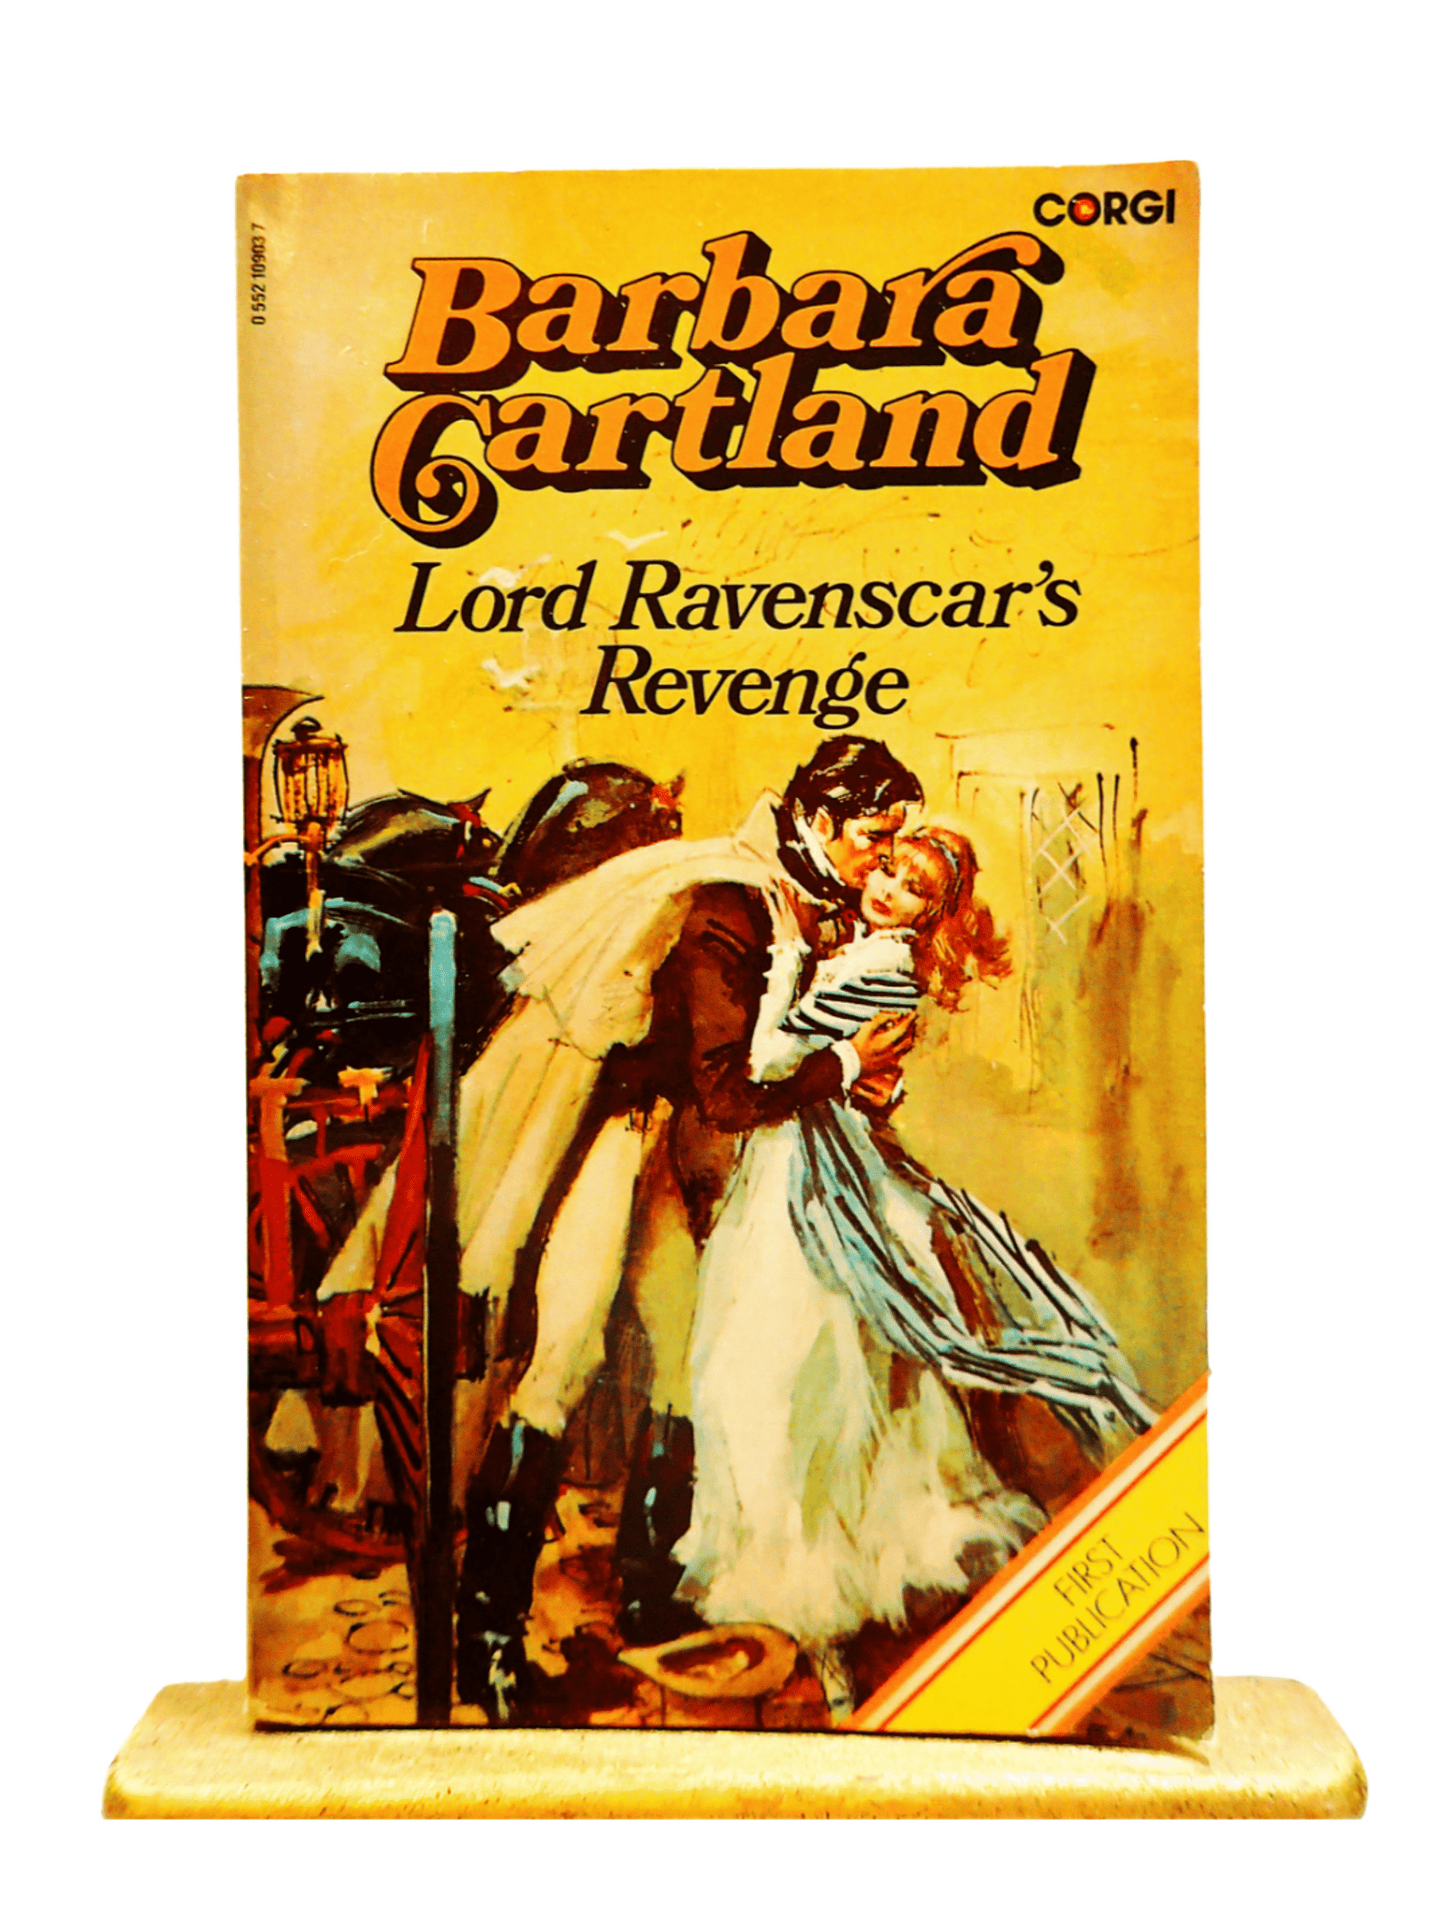 Lord Ravenscar's Revenge by Barbara Cartland Historical Romance Vintage Paperback Book First Edition 1970's